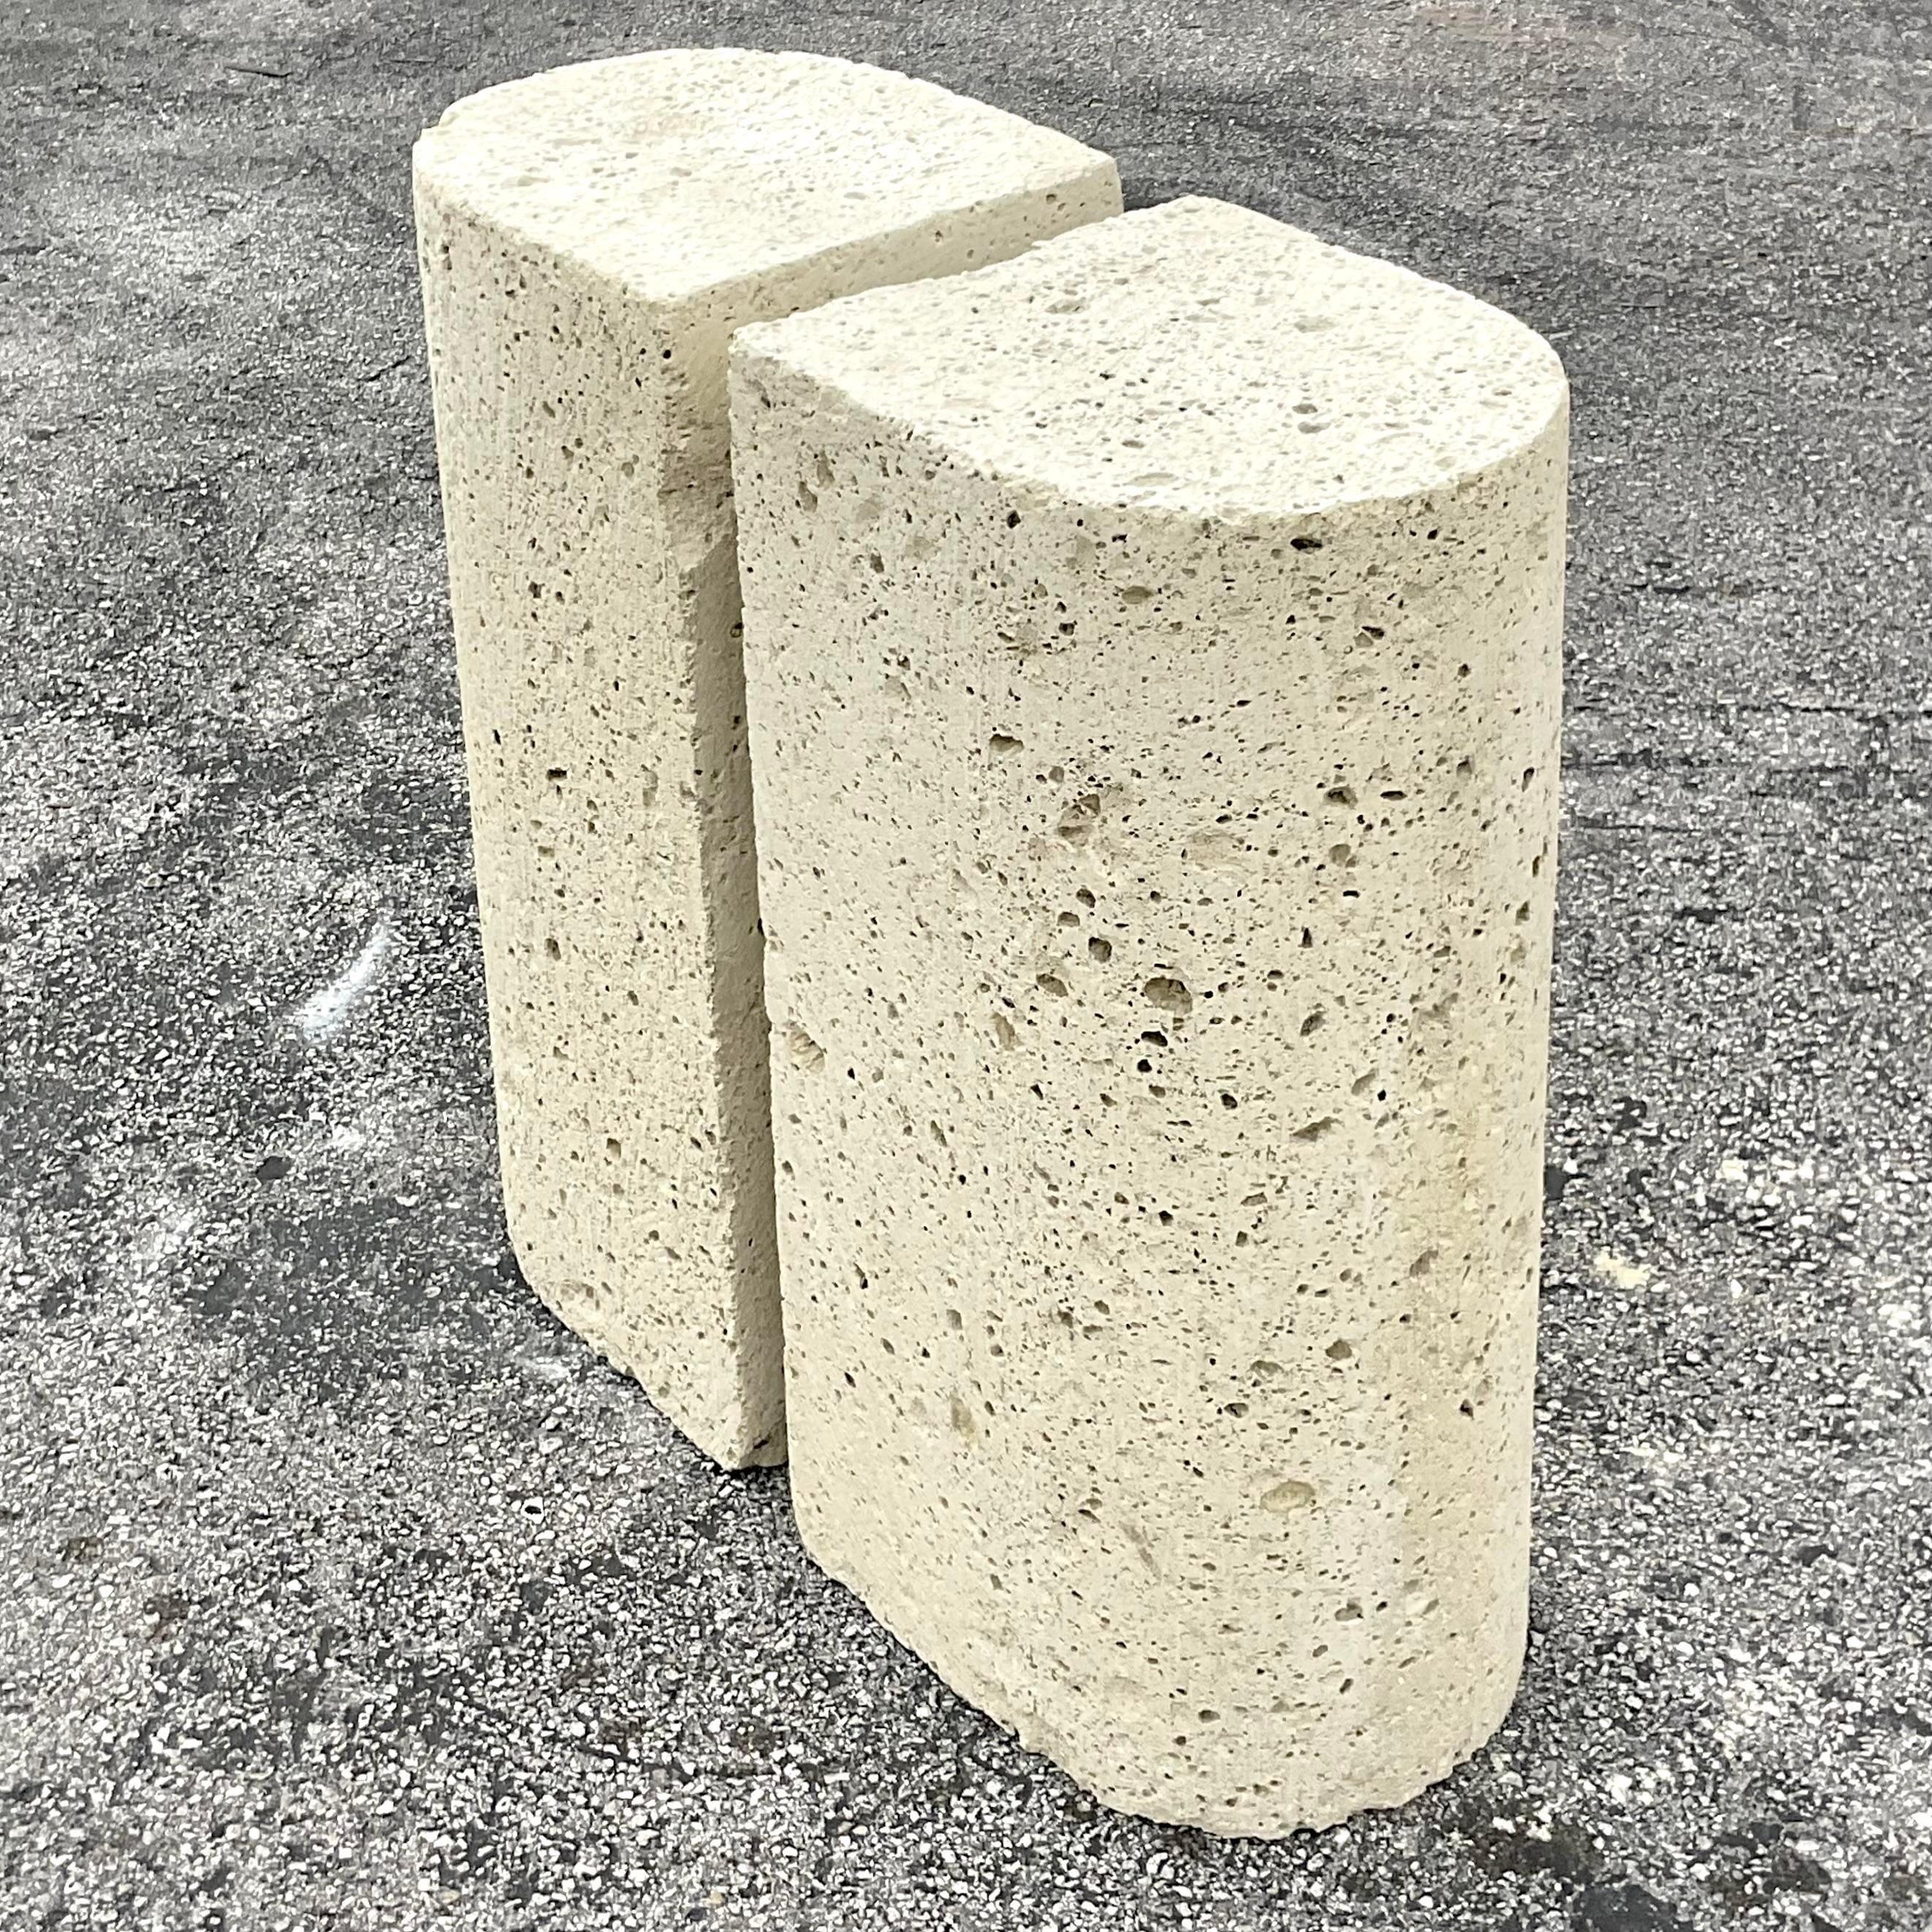 A Fantastic pair of vintage Coastal pedestals. Chic cut coquina stone in a fabulous arched design. Perfect as a pedestal for a defining table, console table or just gorgeous pedestals for your artwork. You decide! Acquired from a Palm Beach estate